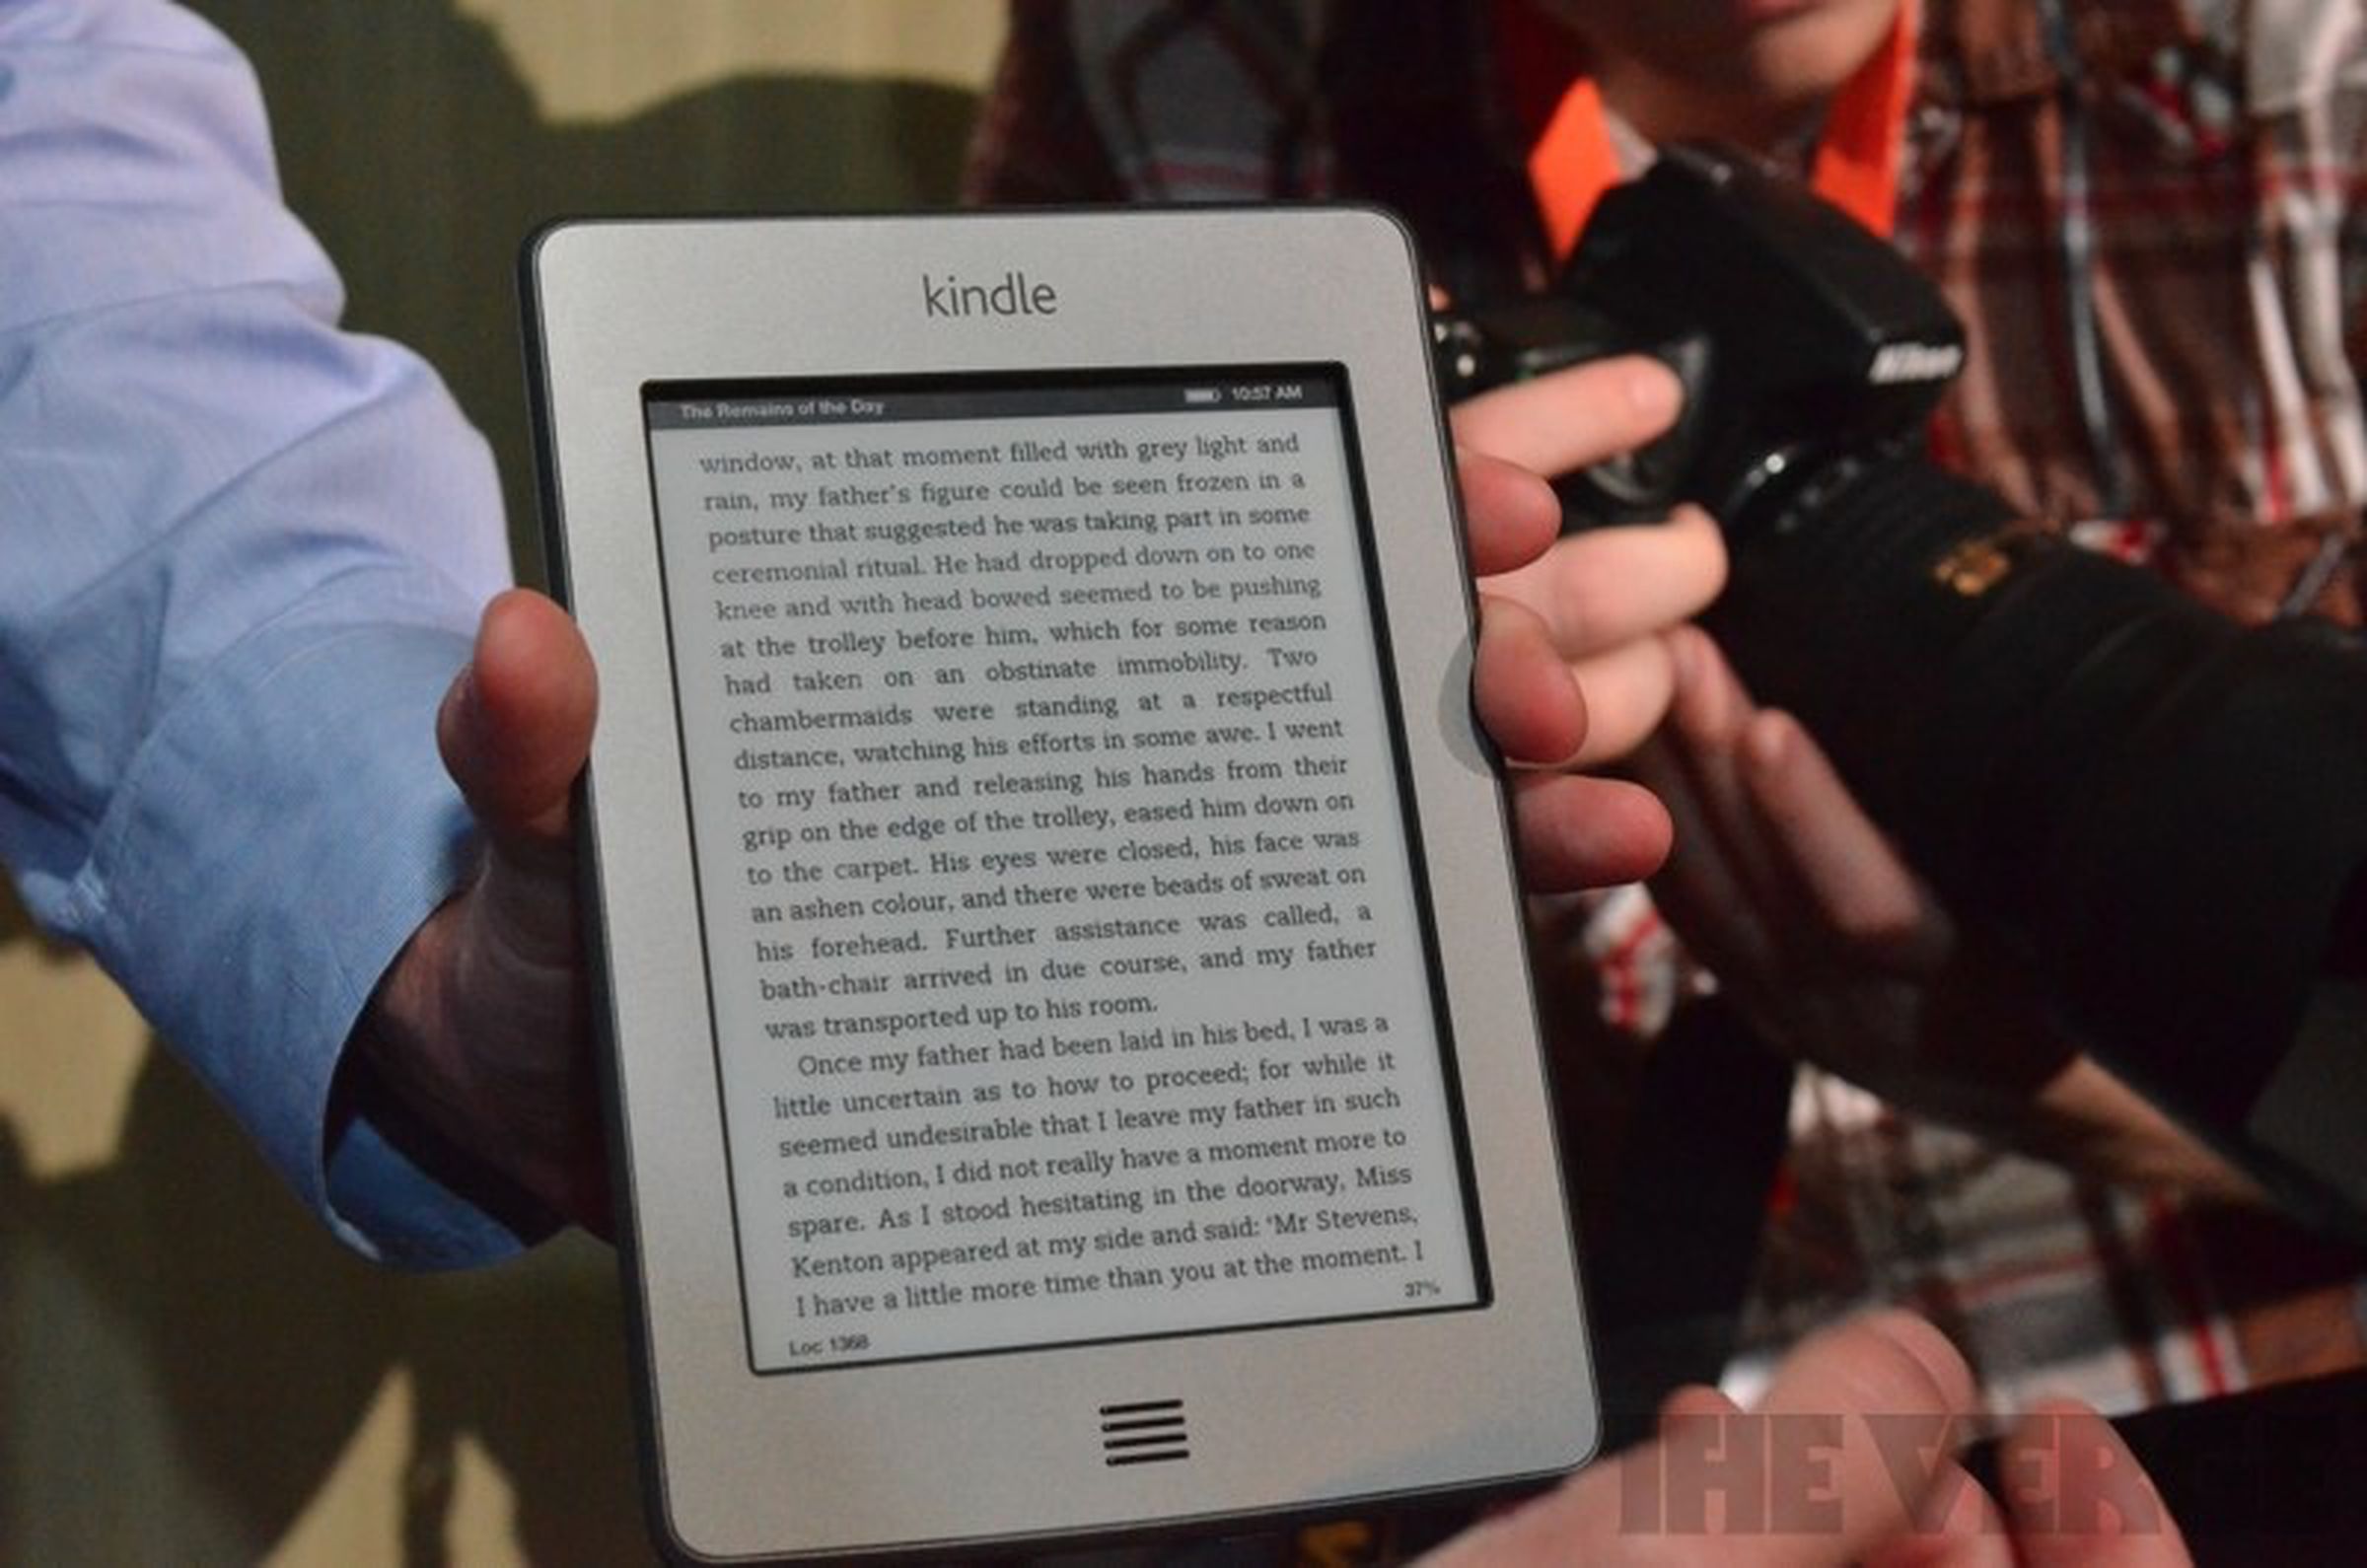 Amazon Kindle Touch hands on pictures